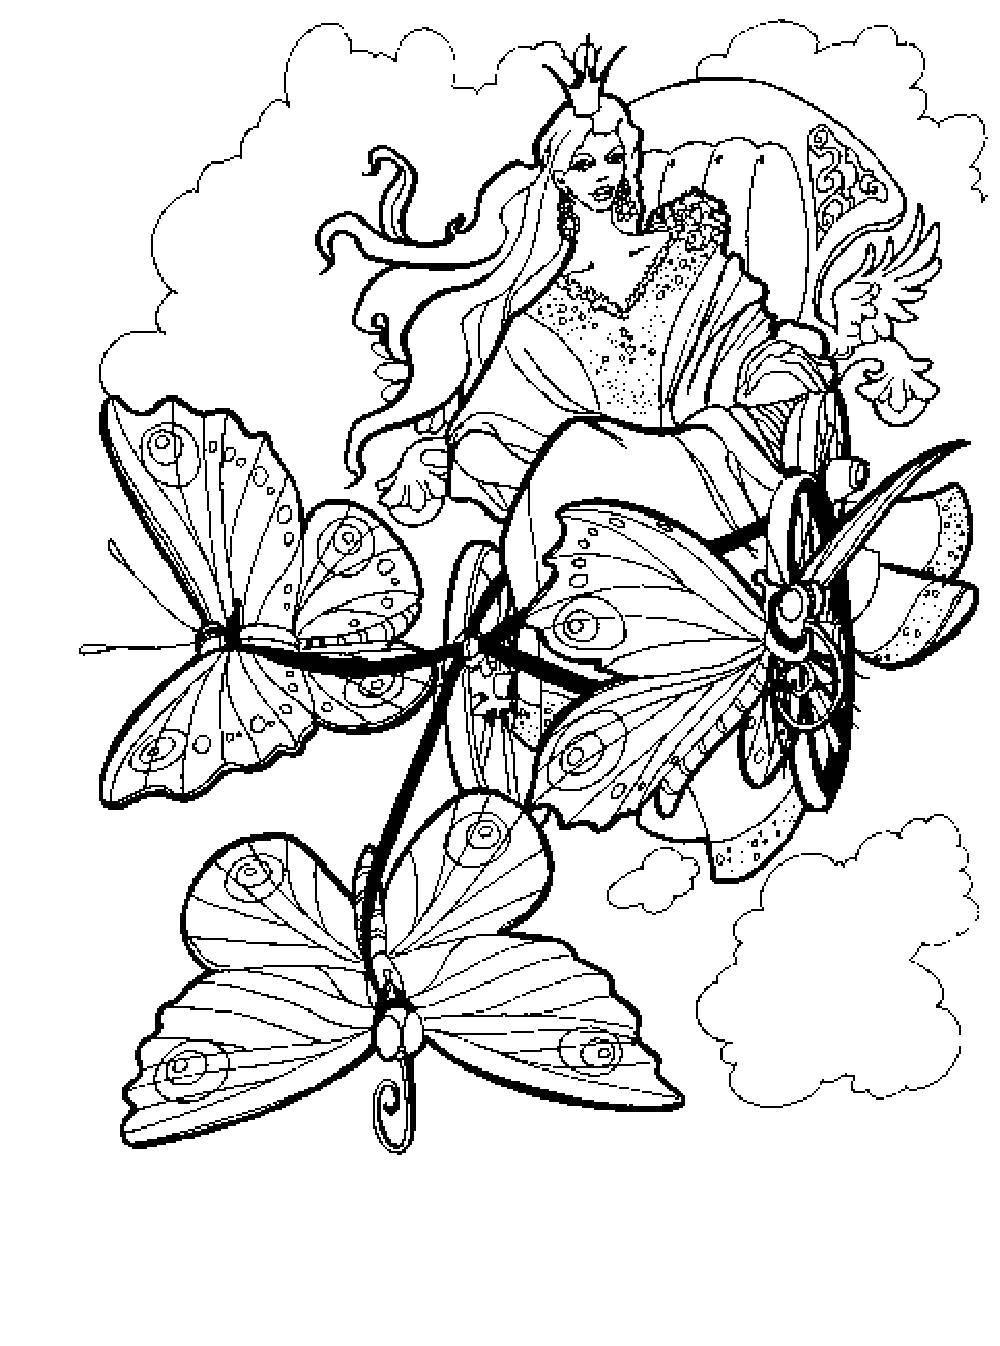 Coloring Queen fairy riding a butterfly. Category fairy. Tags:  fairy, Dindin.